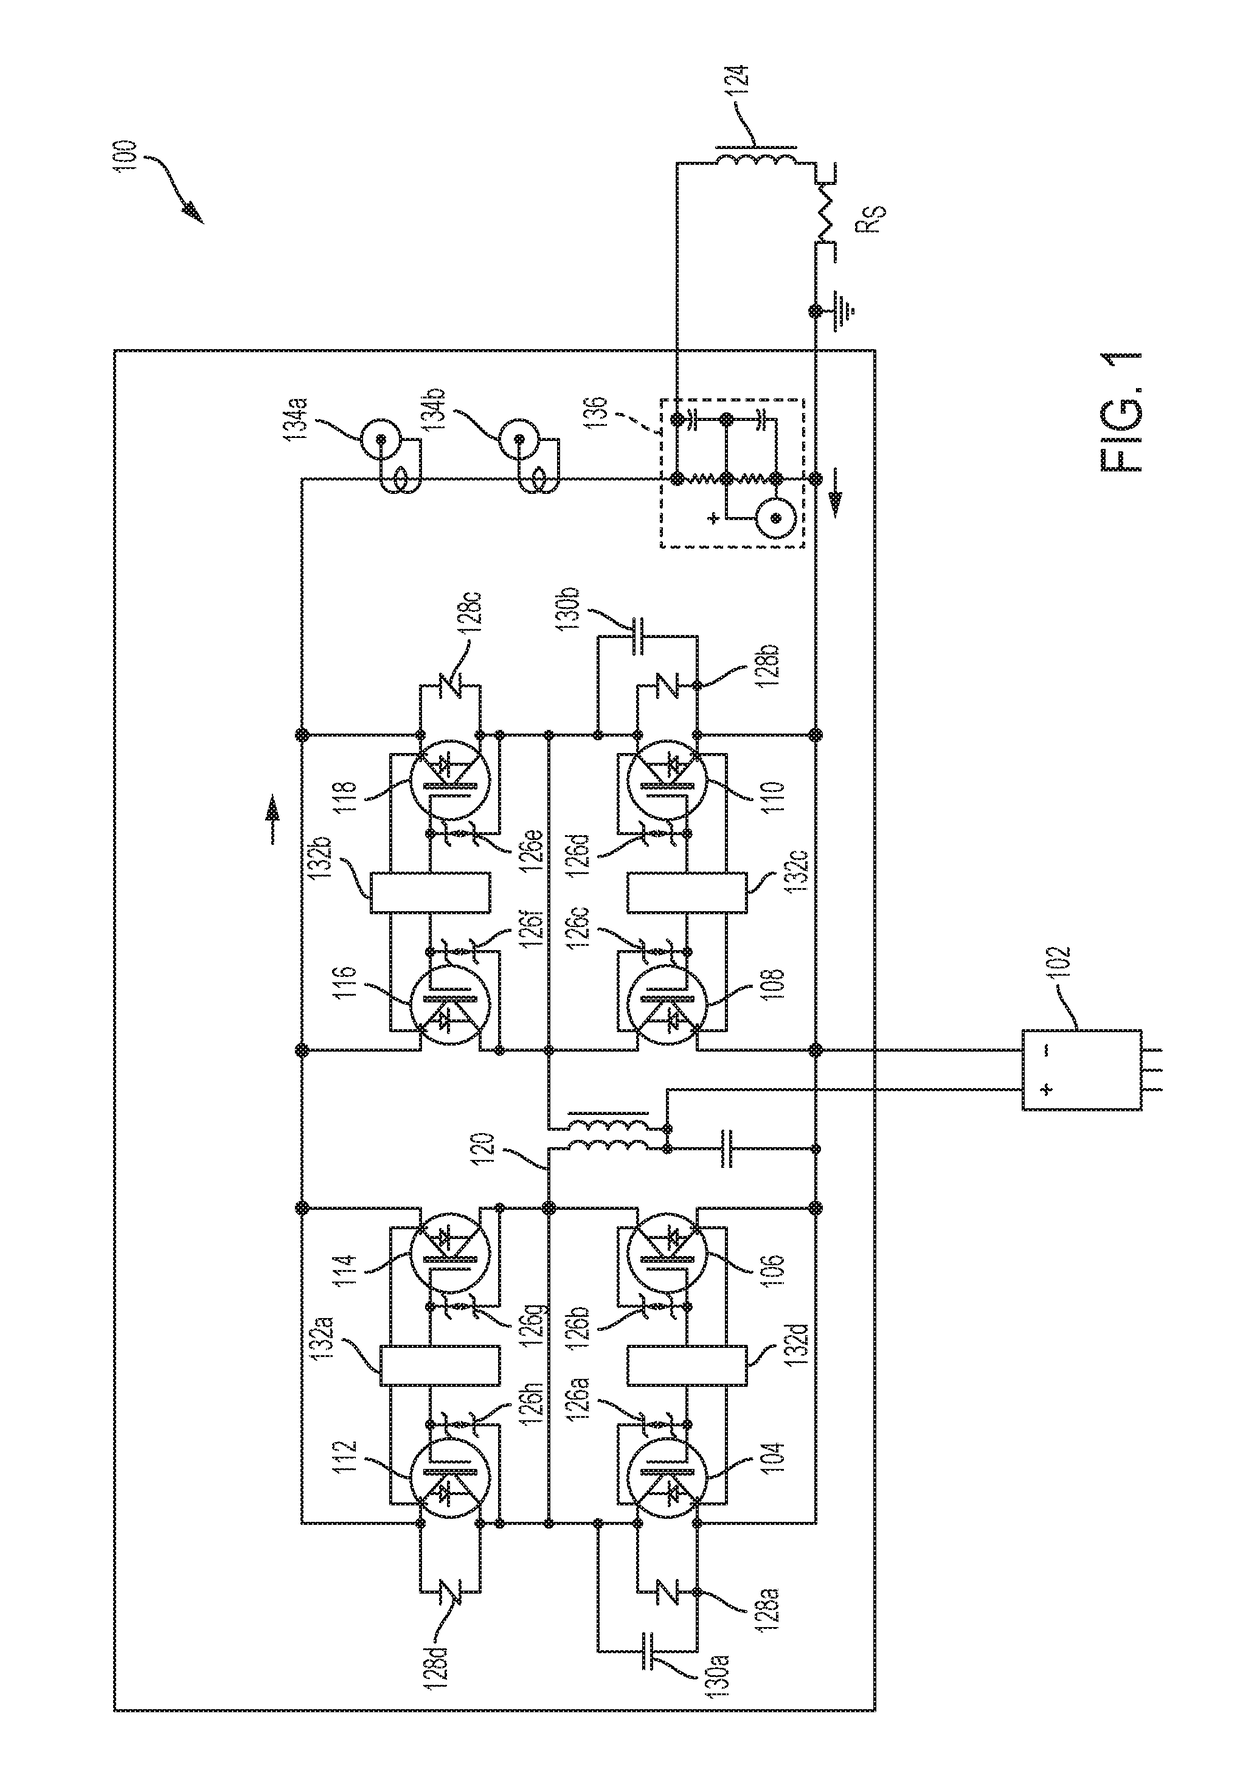 System and method for high power pulse generator